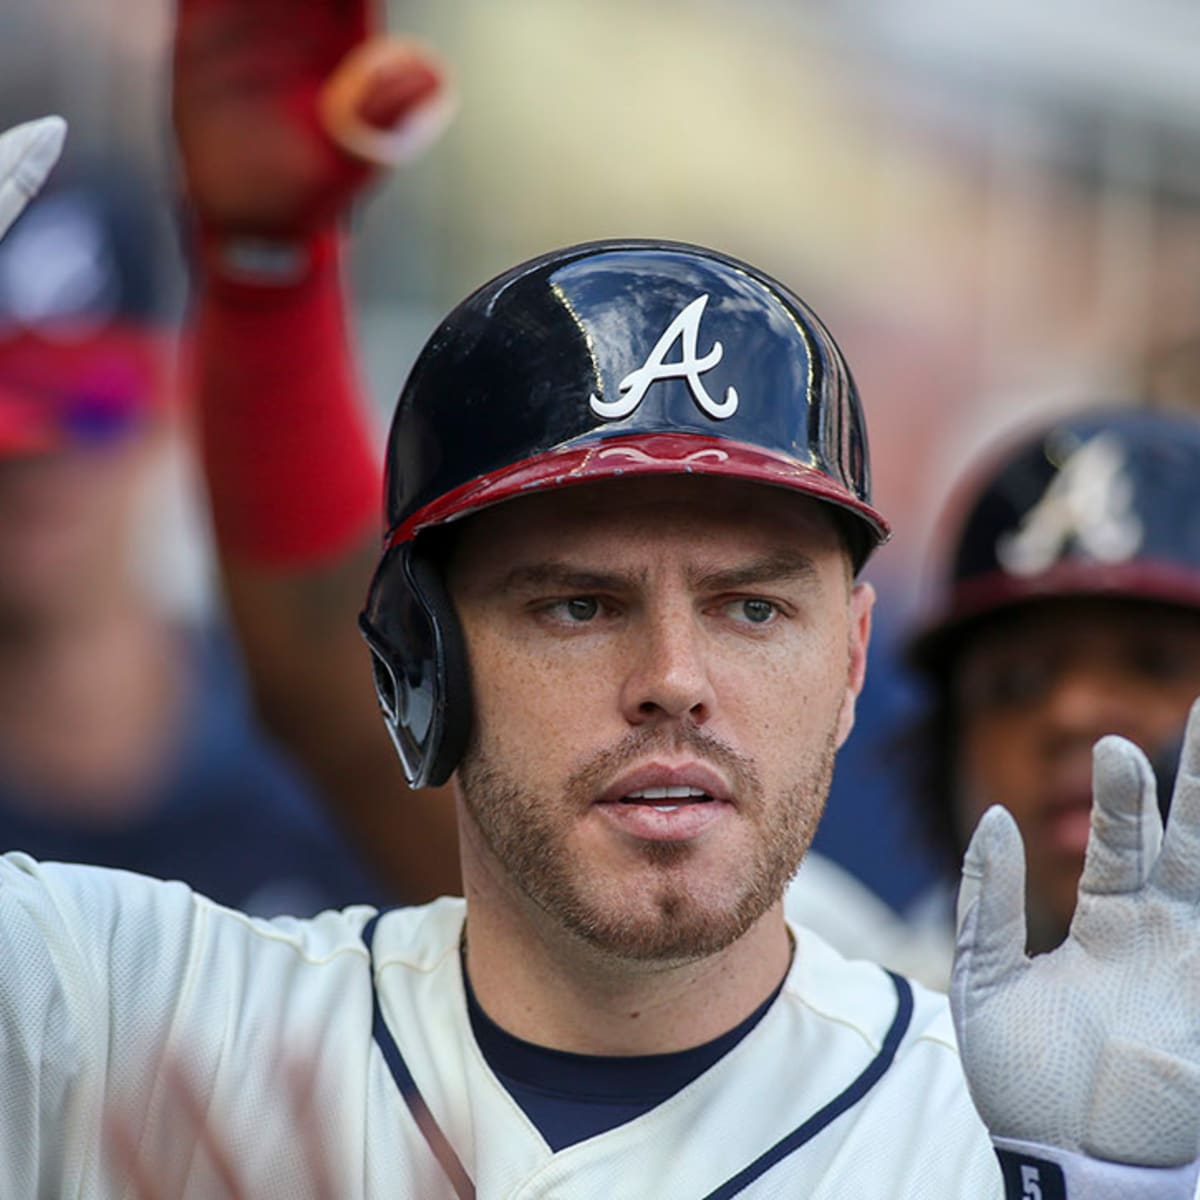 Freddie Freeman among the Braves players to test positive for